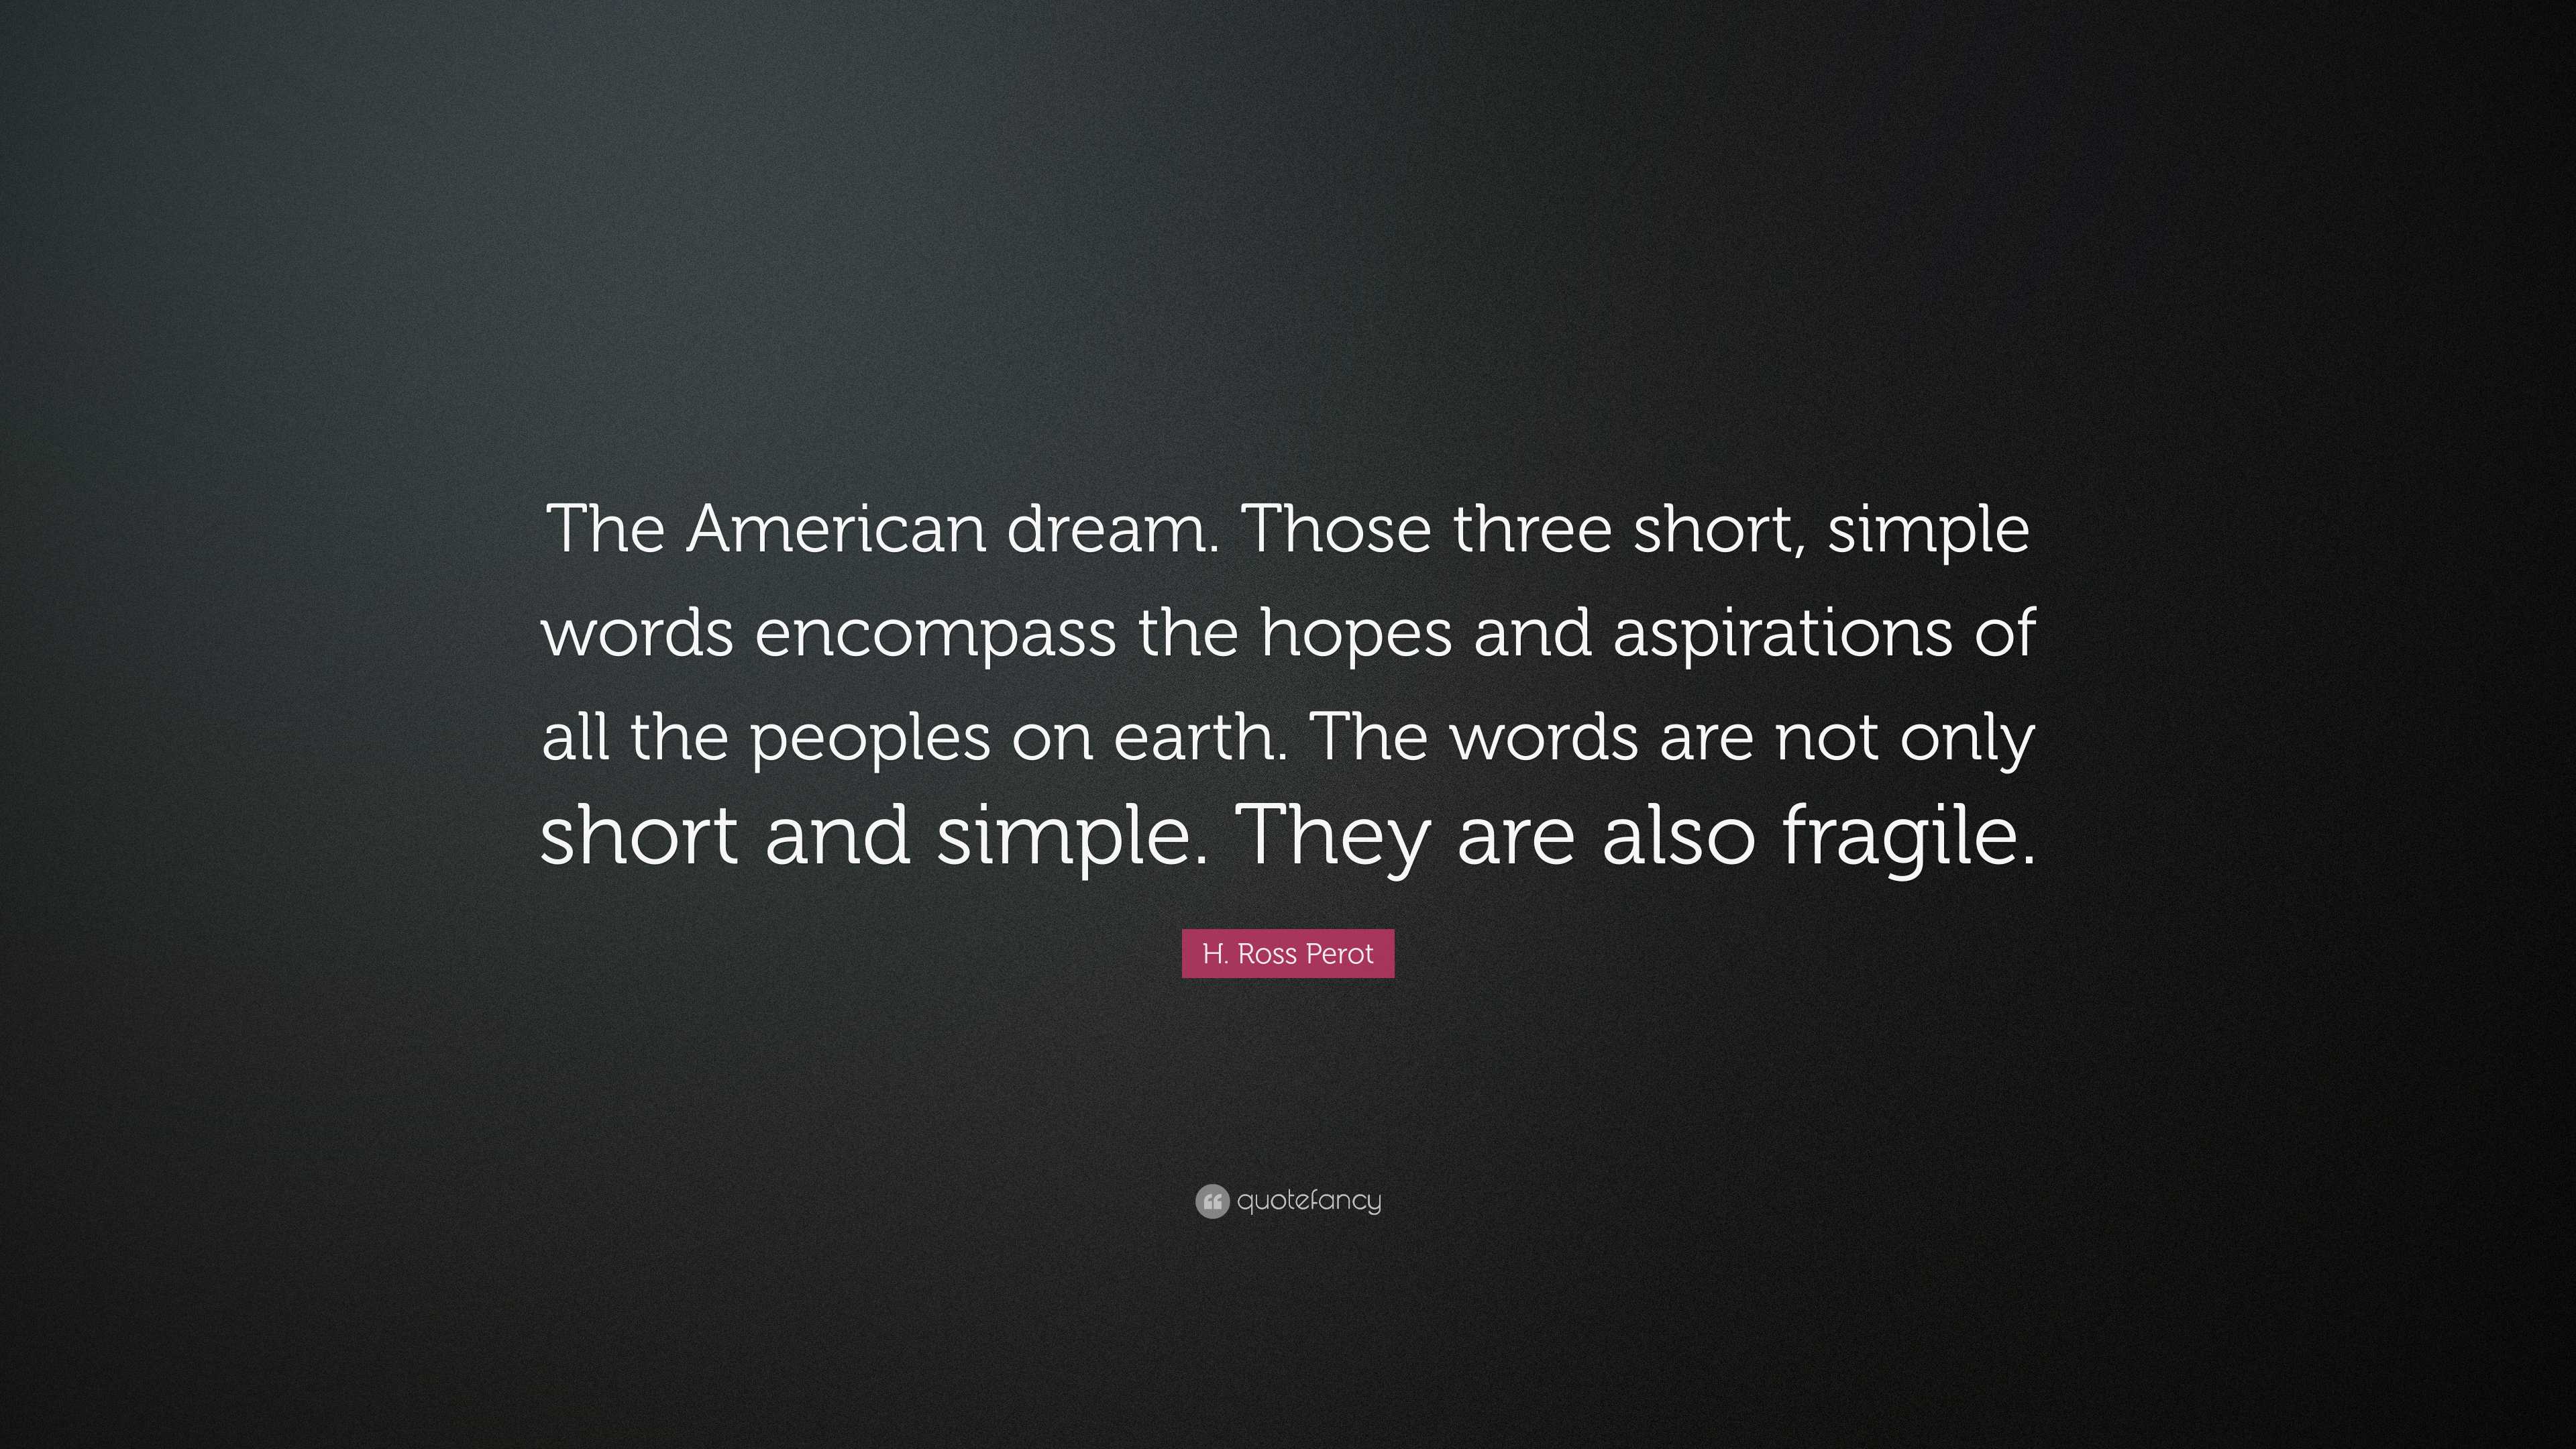 H. Ross Perot Quote: “The American dream. Those three short, simple words  encompass the hopes and aspirations of all the peoples on earth. The”